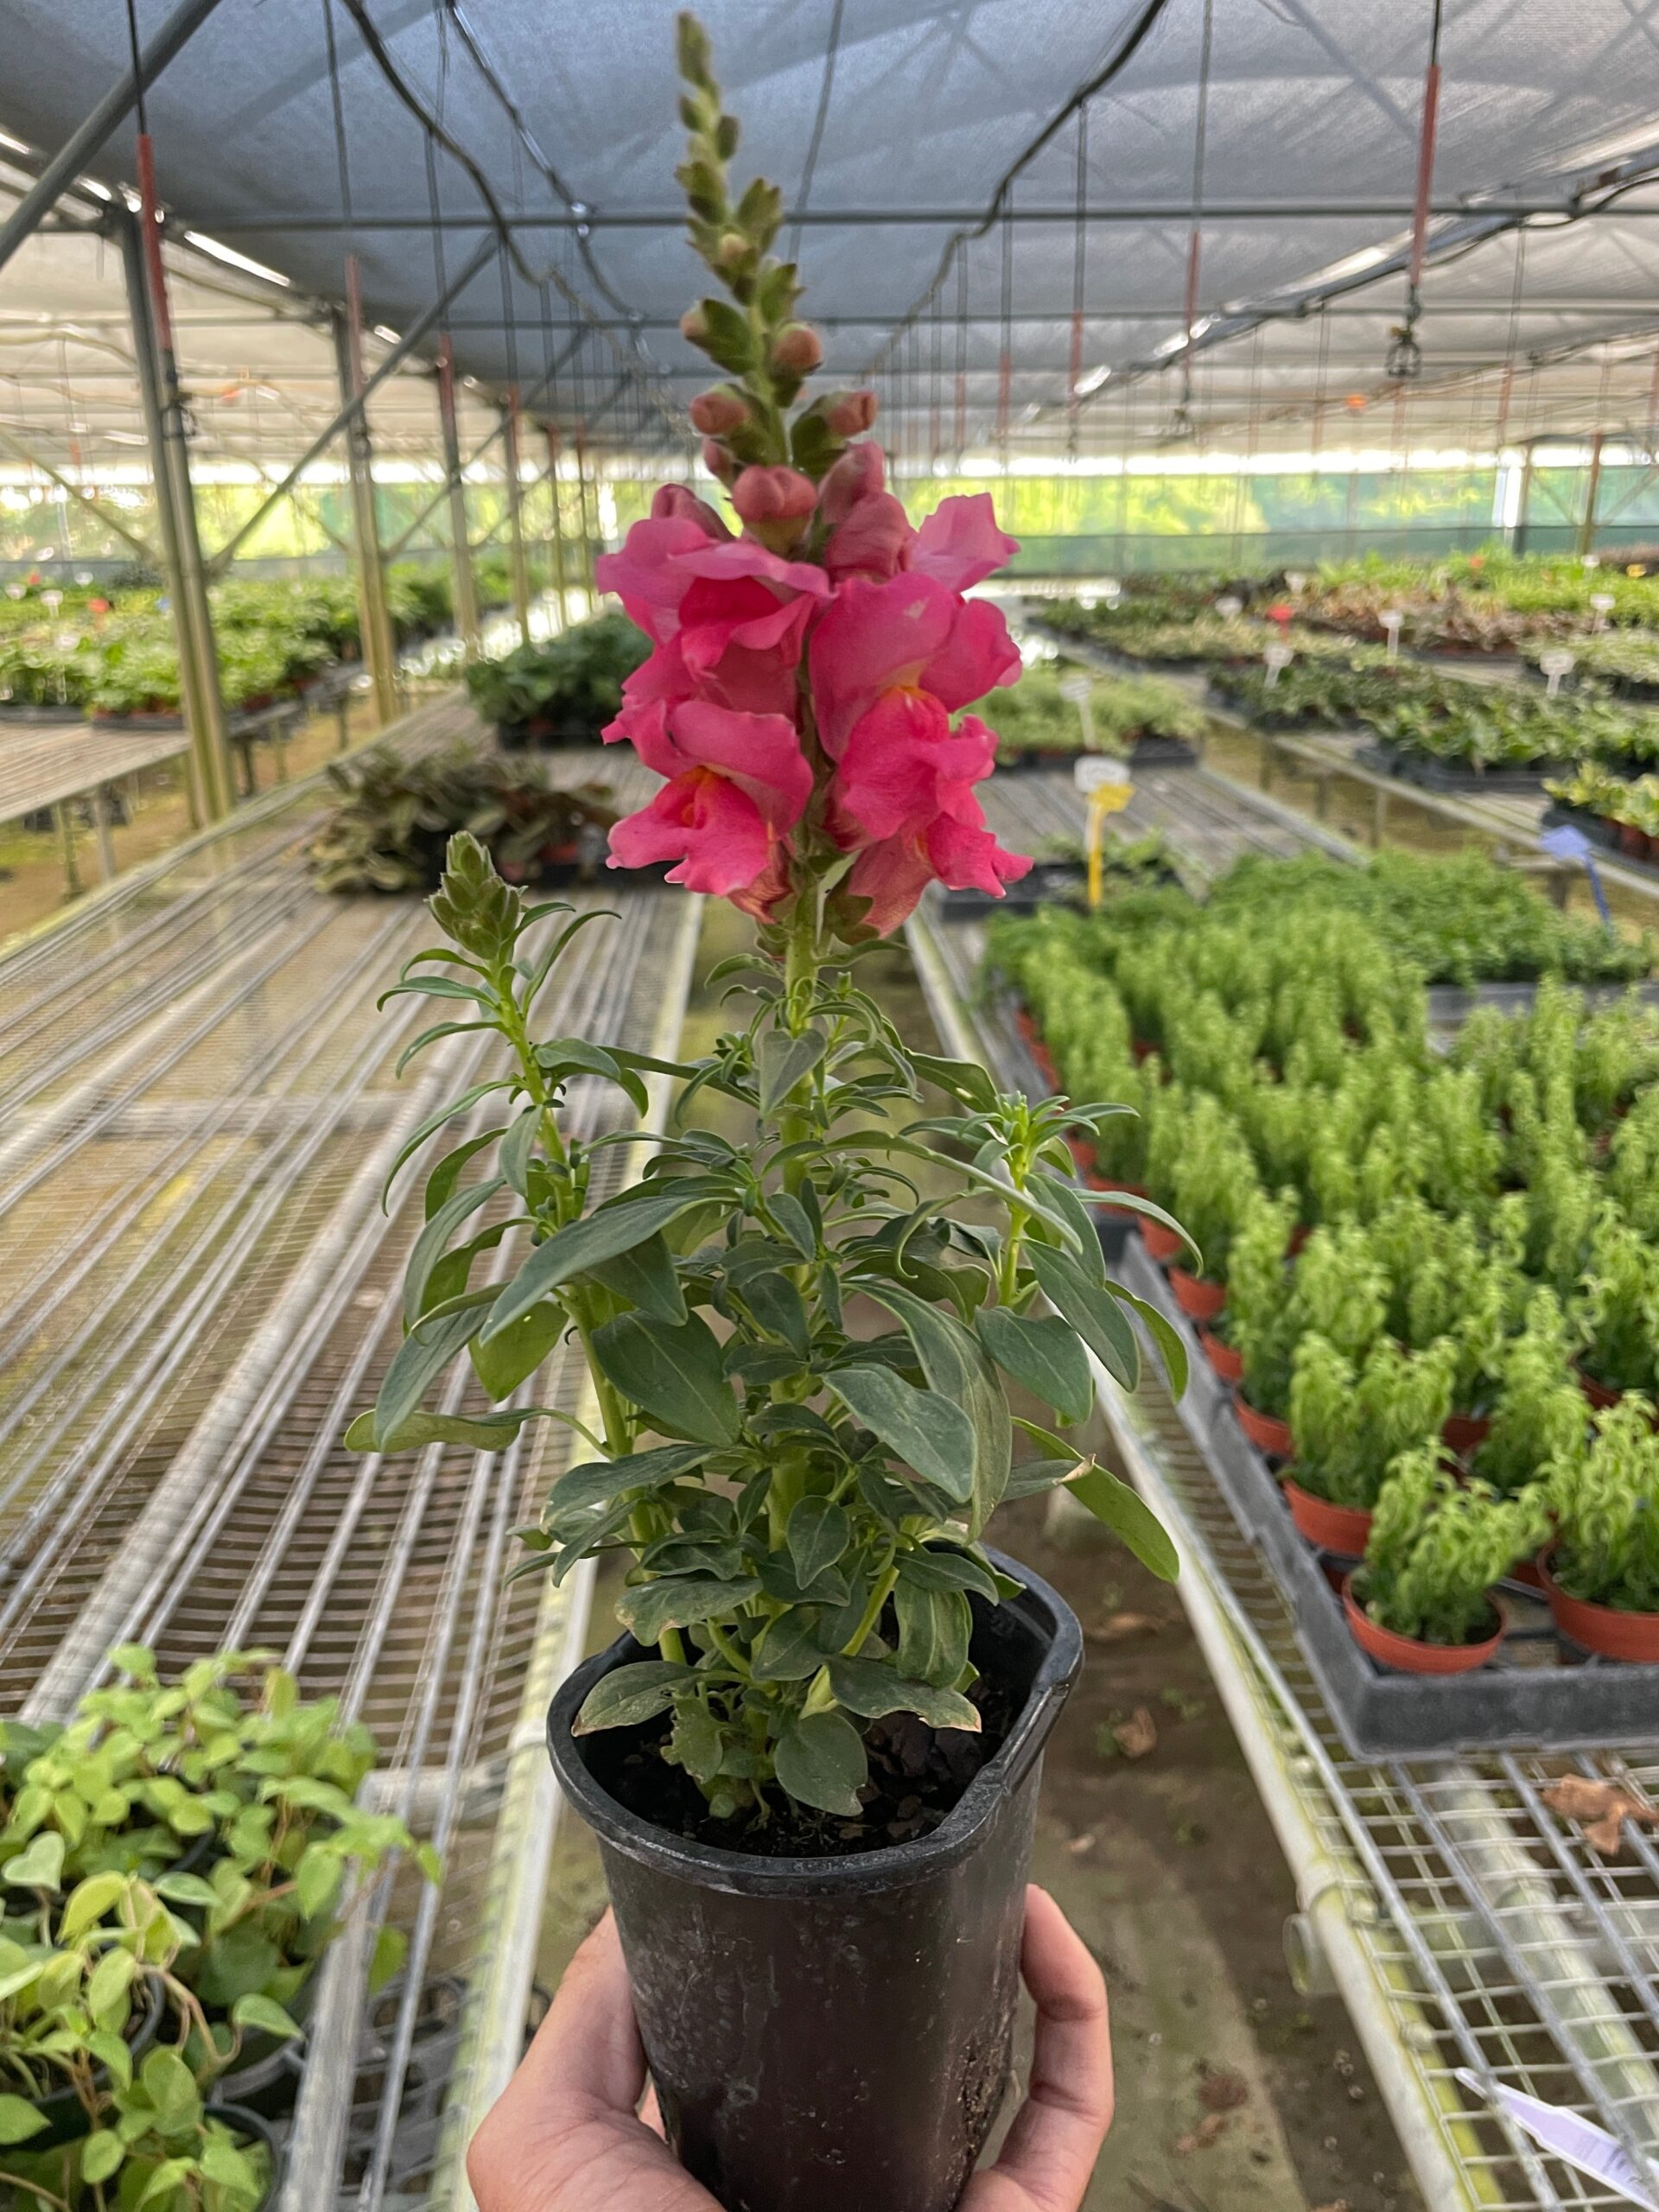 A person holds a black pot with a pink snapdragon plant inside a greenhouse with rows of potted plants.